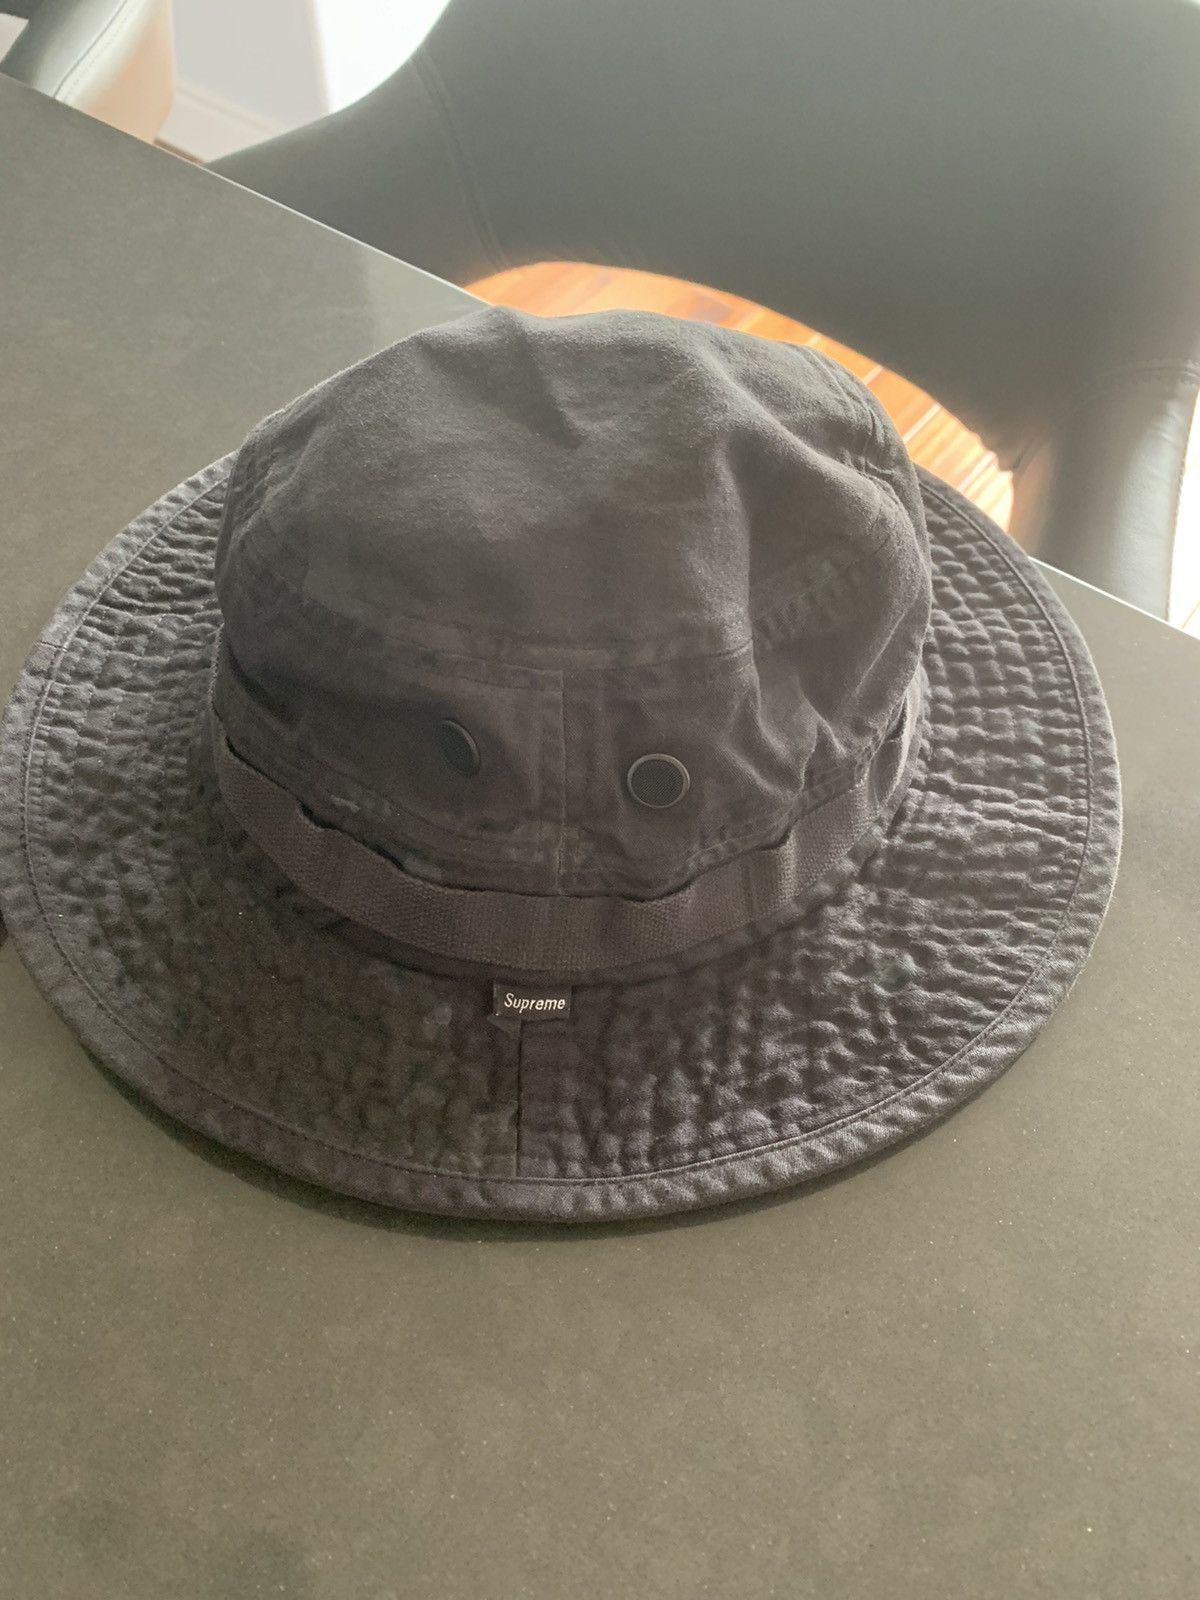 Supreme Camo overdyed boonie hat | Grailed